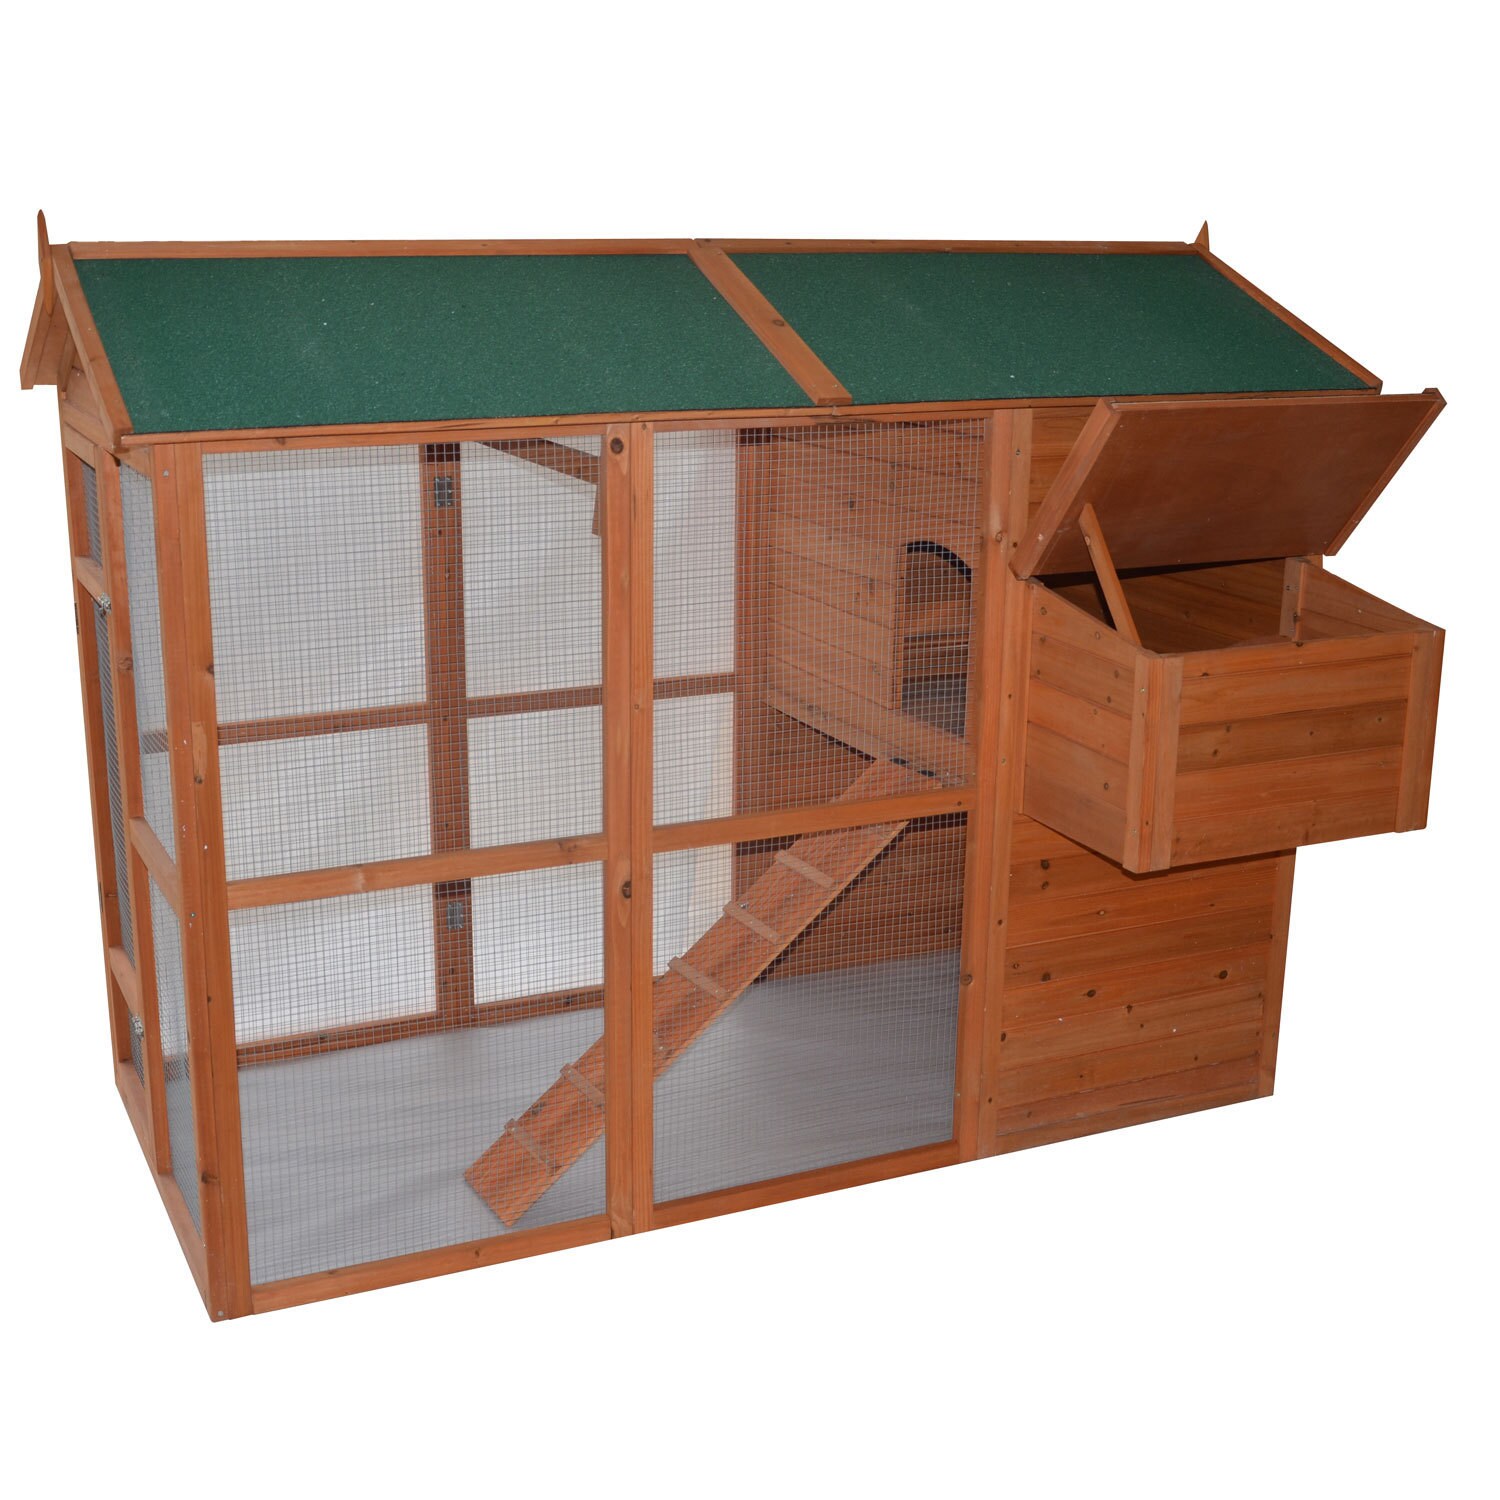 Pawhut Deluxe Large Backyard Chicken Coop Hen House With Outdoor Run Browngreen 90l X 50w X 62h90l X 50w X 62h